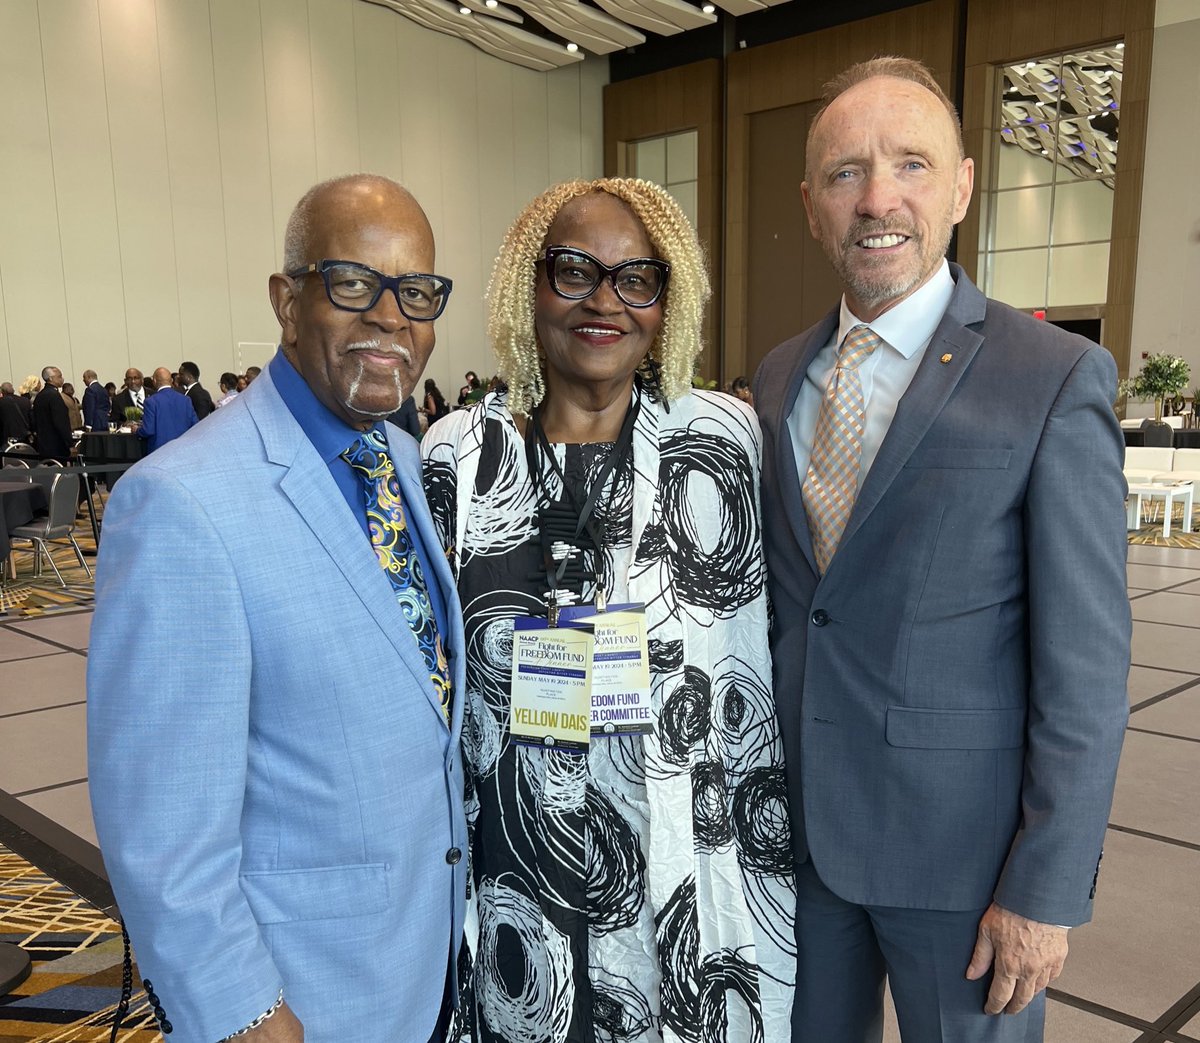 The @DETROITNAACP Detroit’s Fight for Freedom Fund Dinner started in spring 1956 during a period of renewed hope and determination among Black Americans. So grateful to join this tradition with my #OaklandCounty colleagues and hear from @POTUS this past #FreedomWeekend! -Dave